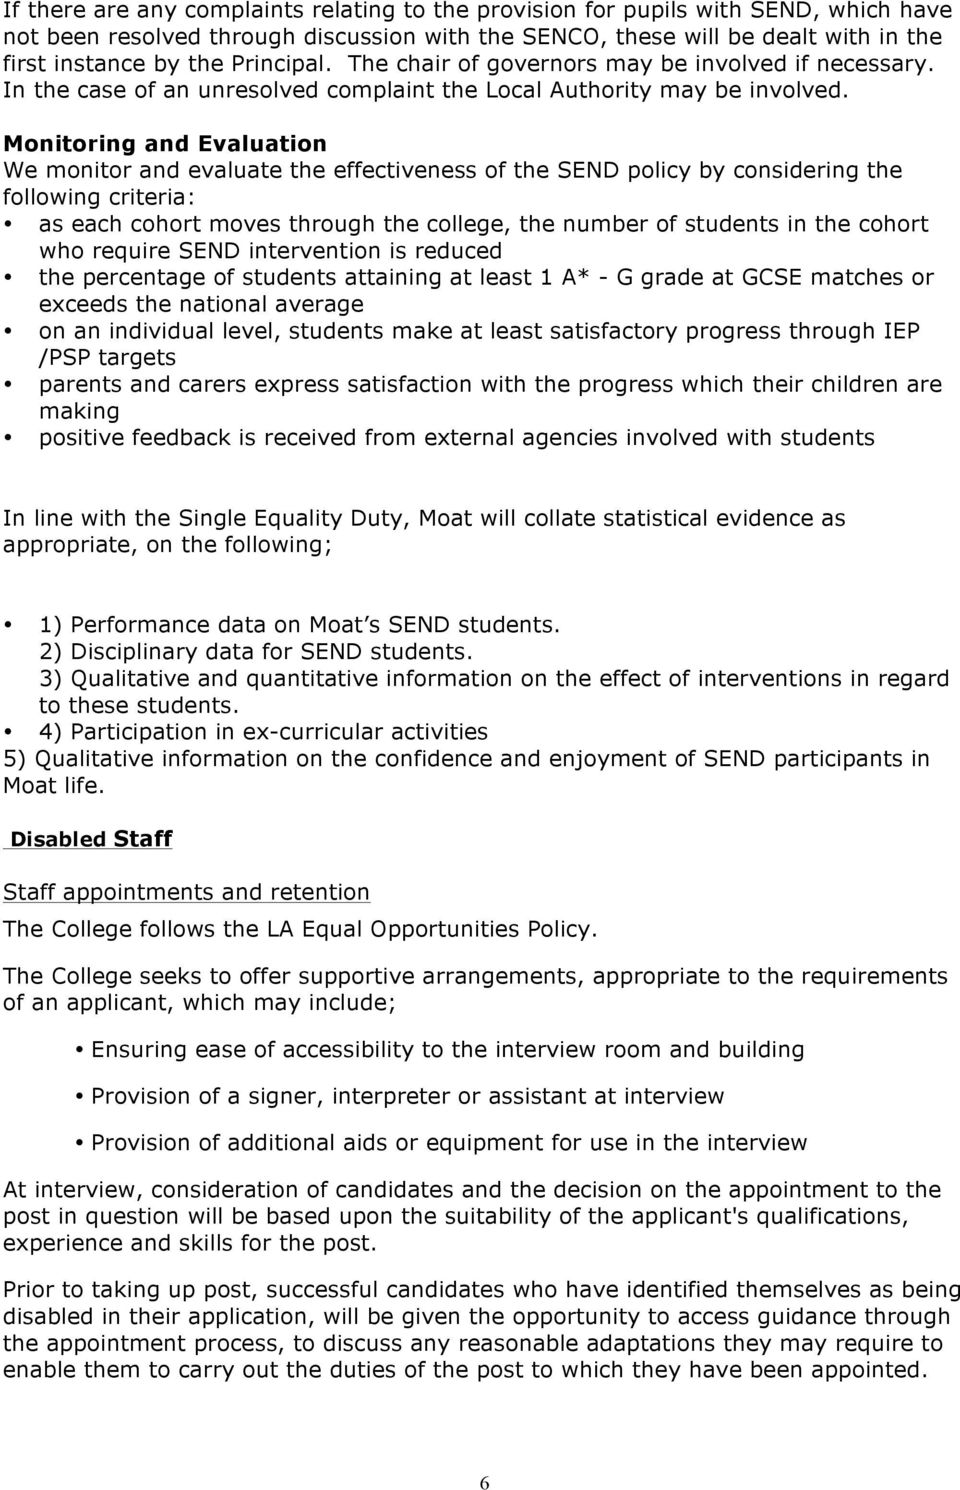 Monitoring and Evaluation We monitor and evaluate the effectiveness of the SEND policy by considering the following criteria: as each cohort moves through the college, the number of students in the